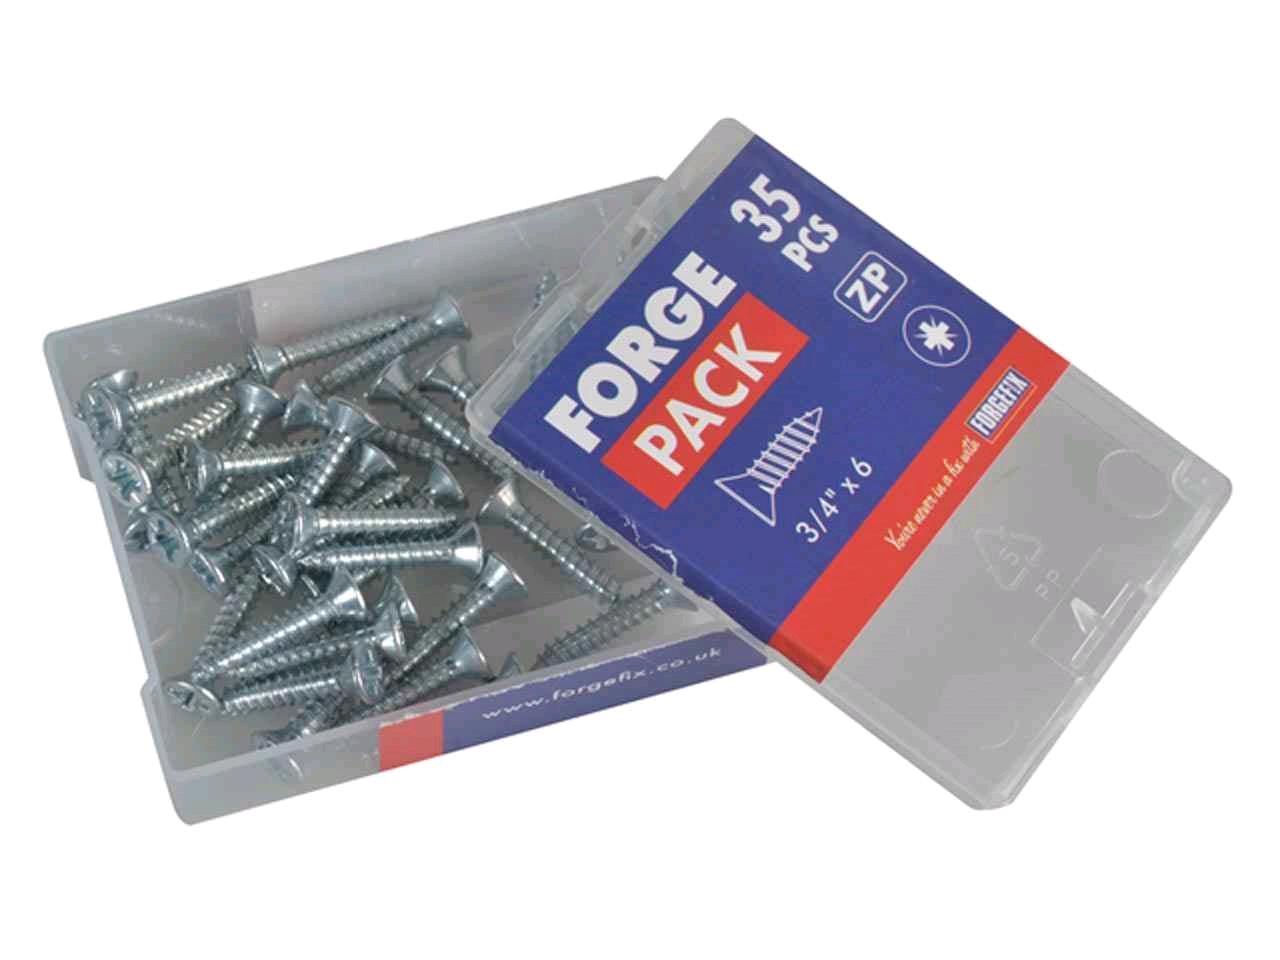 Forgefix 3/4" x 6 Self Tapping Screw Countersunk (Pack of 35) Zinc Plated 